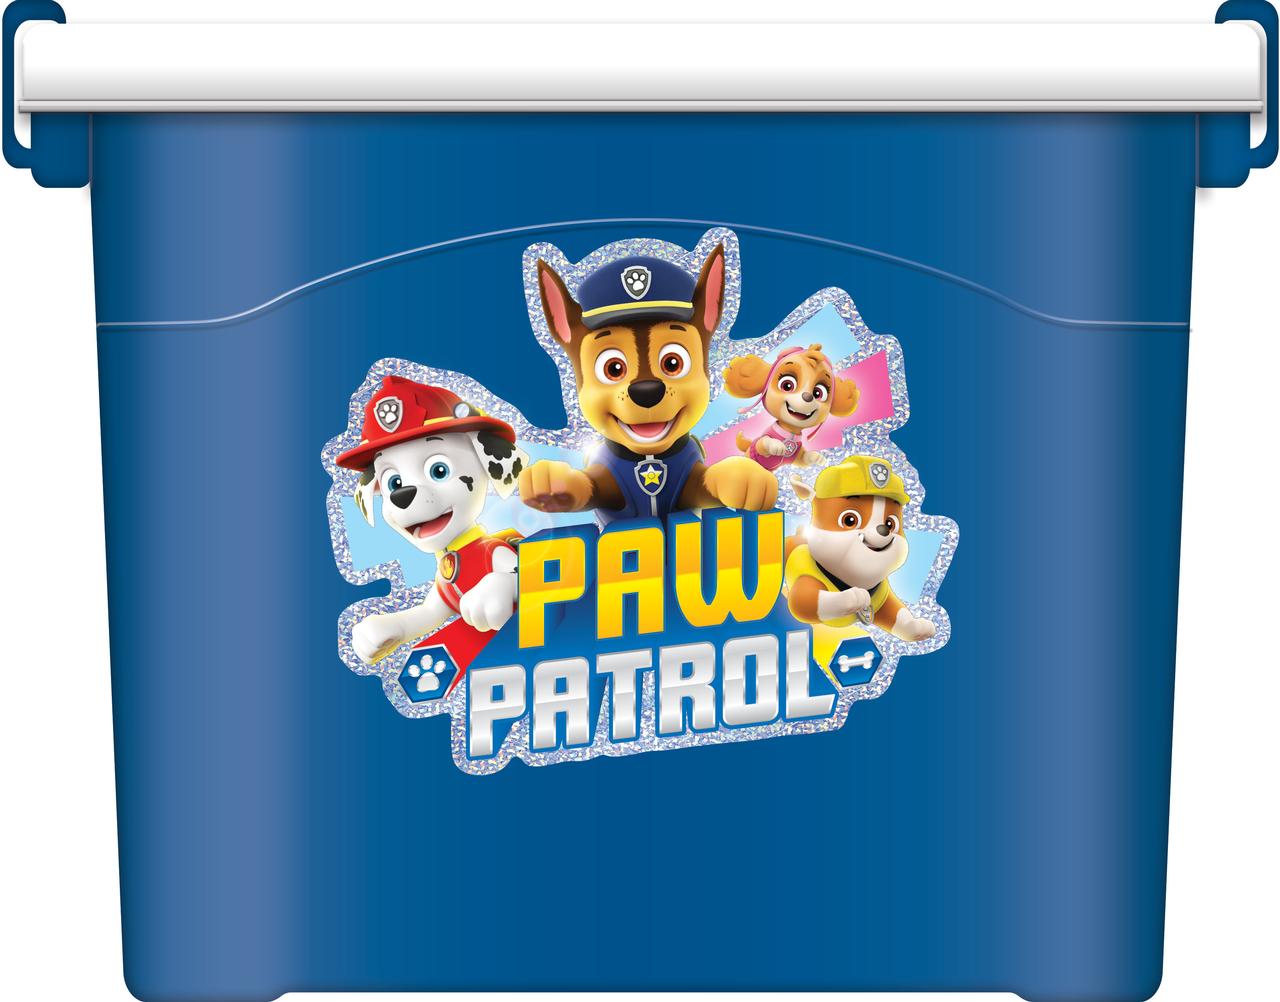 PAW Patrol Art Tub with a Coloring Book and Coloring Supplies - image 2 of 9